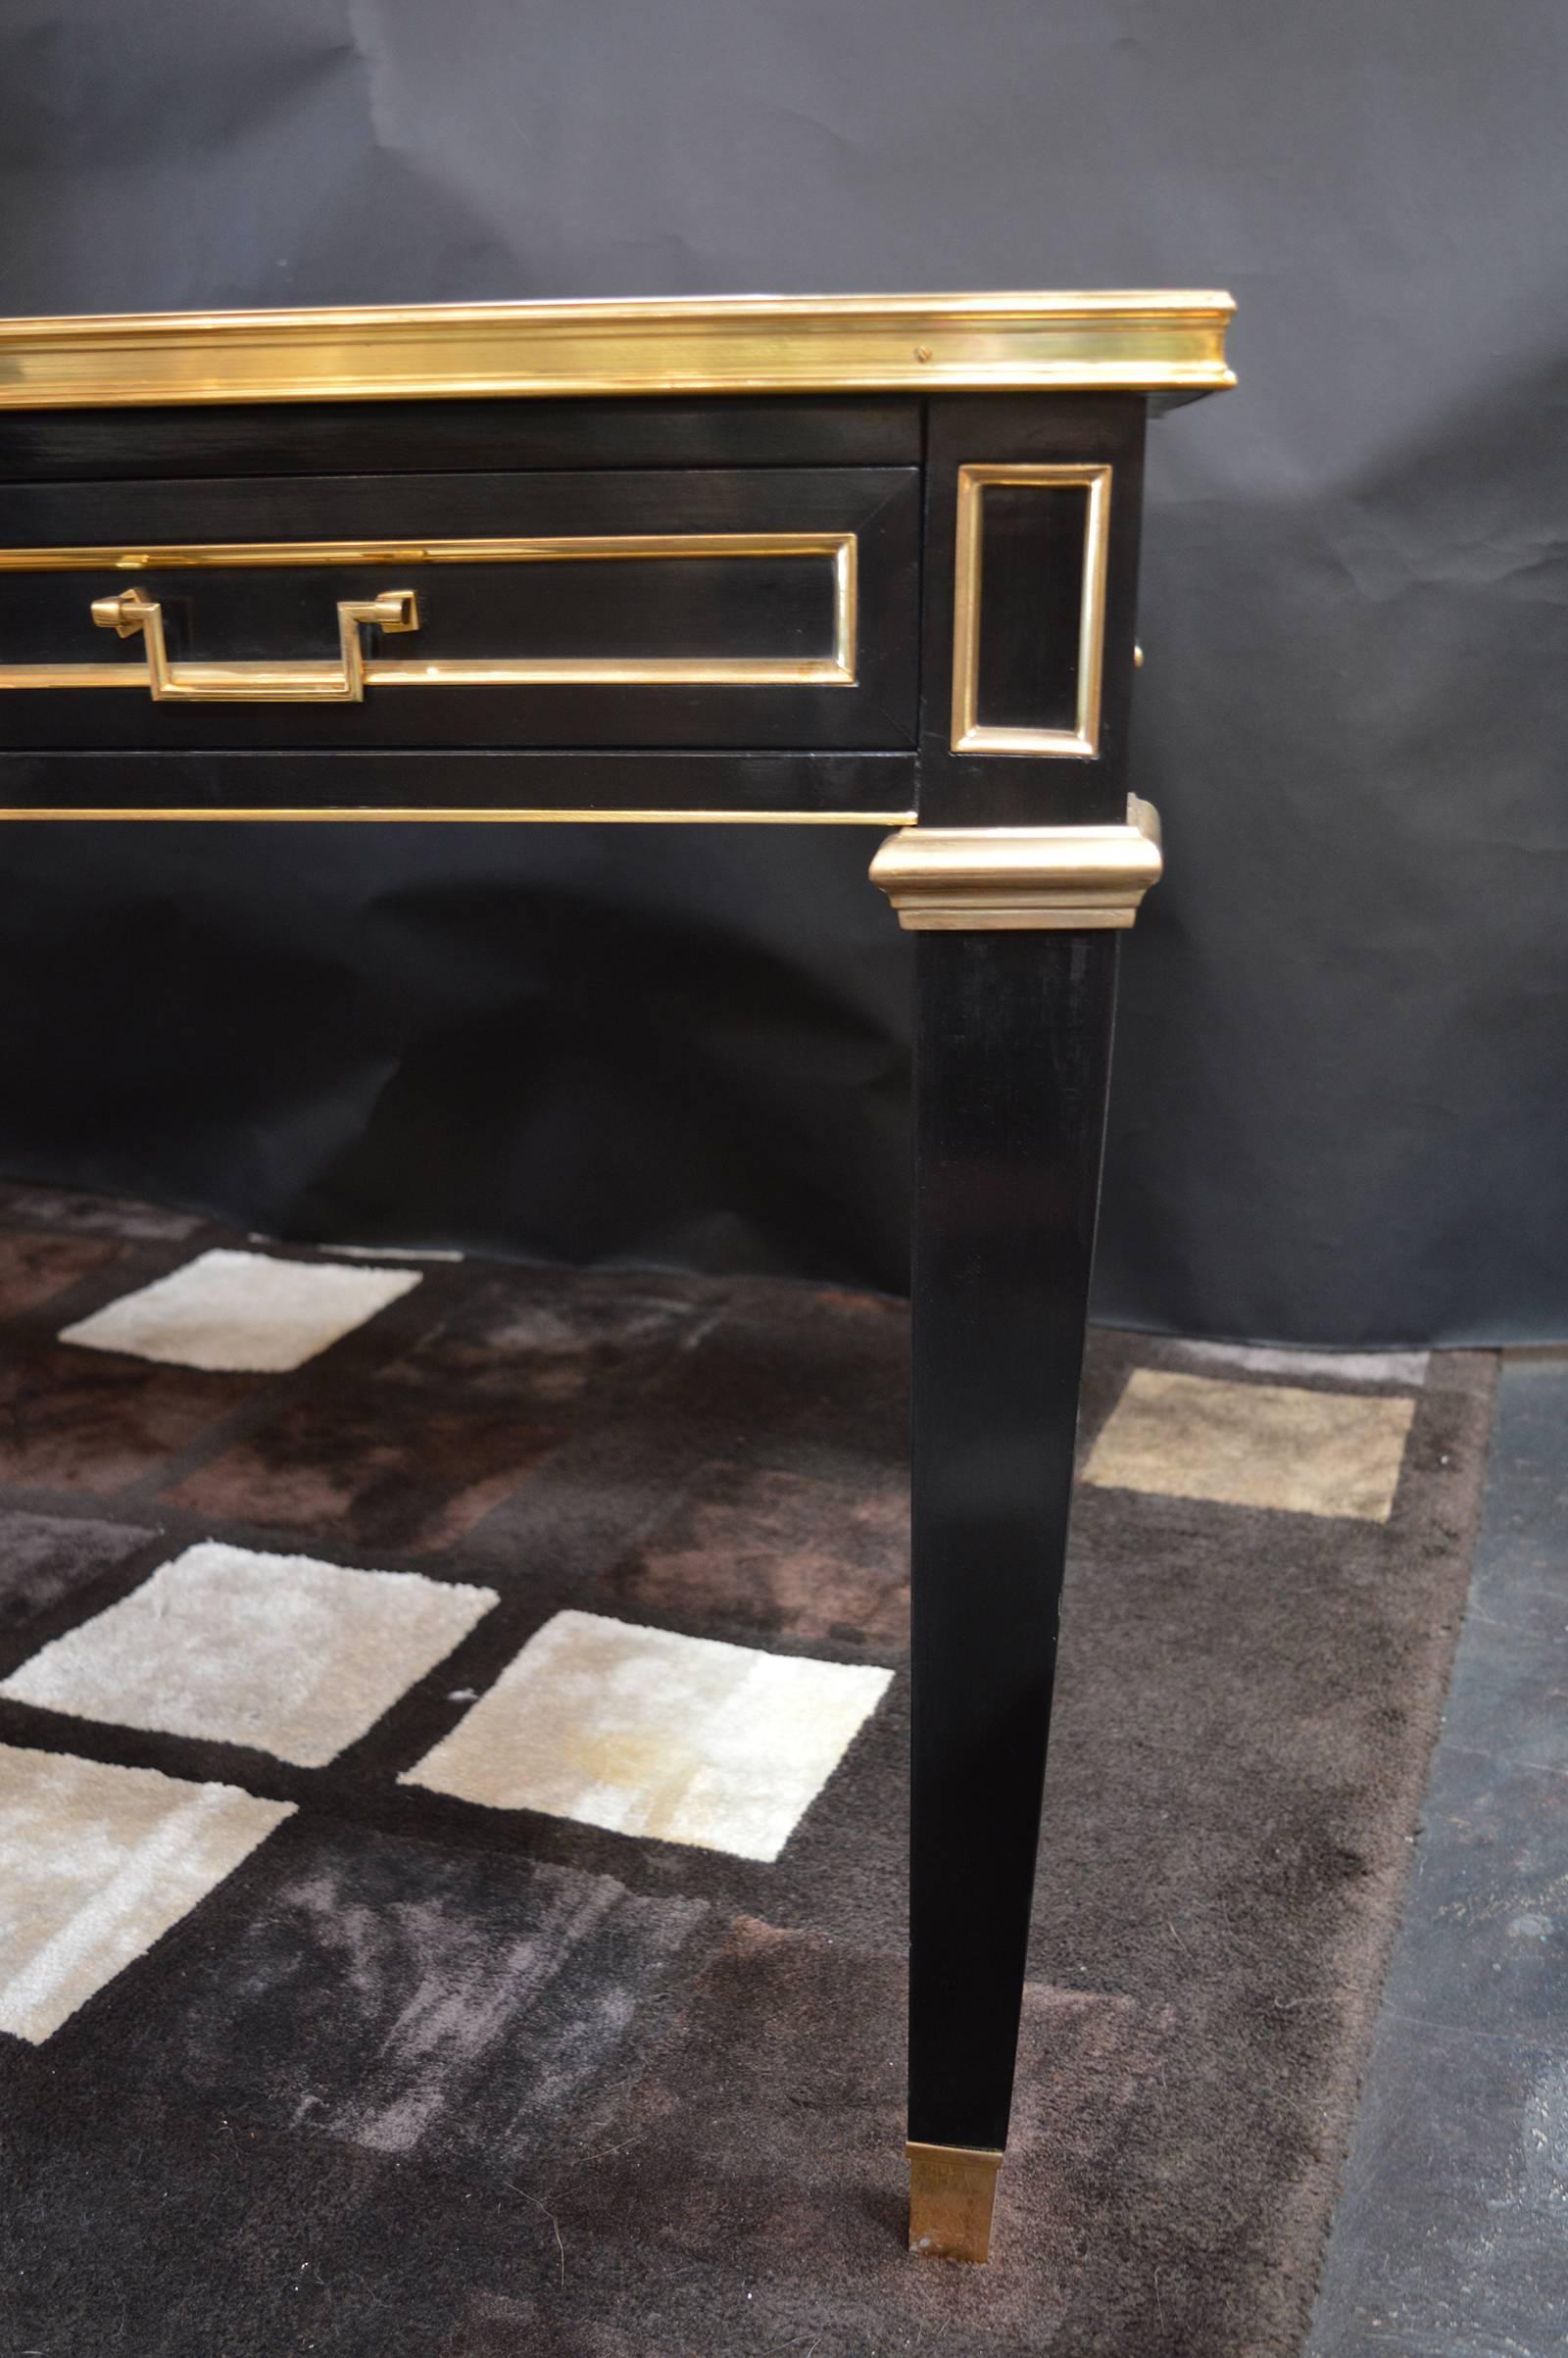 Louis XVI style ebonized bureau plat having inset leather top with bronze trim over drawers and supported on bronze mounted legs.
From Jansen collections, launched in 1972
Four drawers.